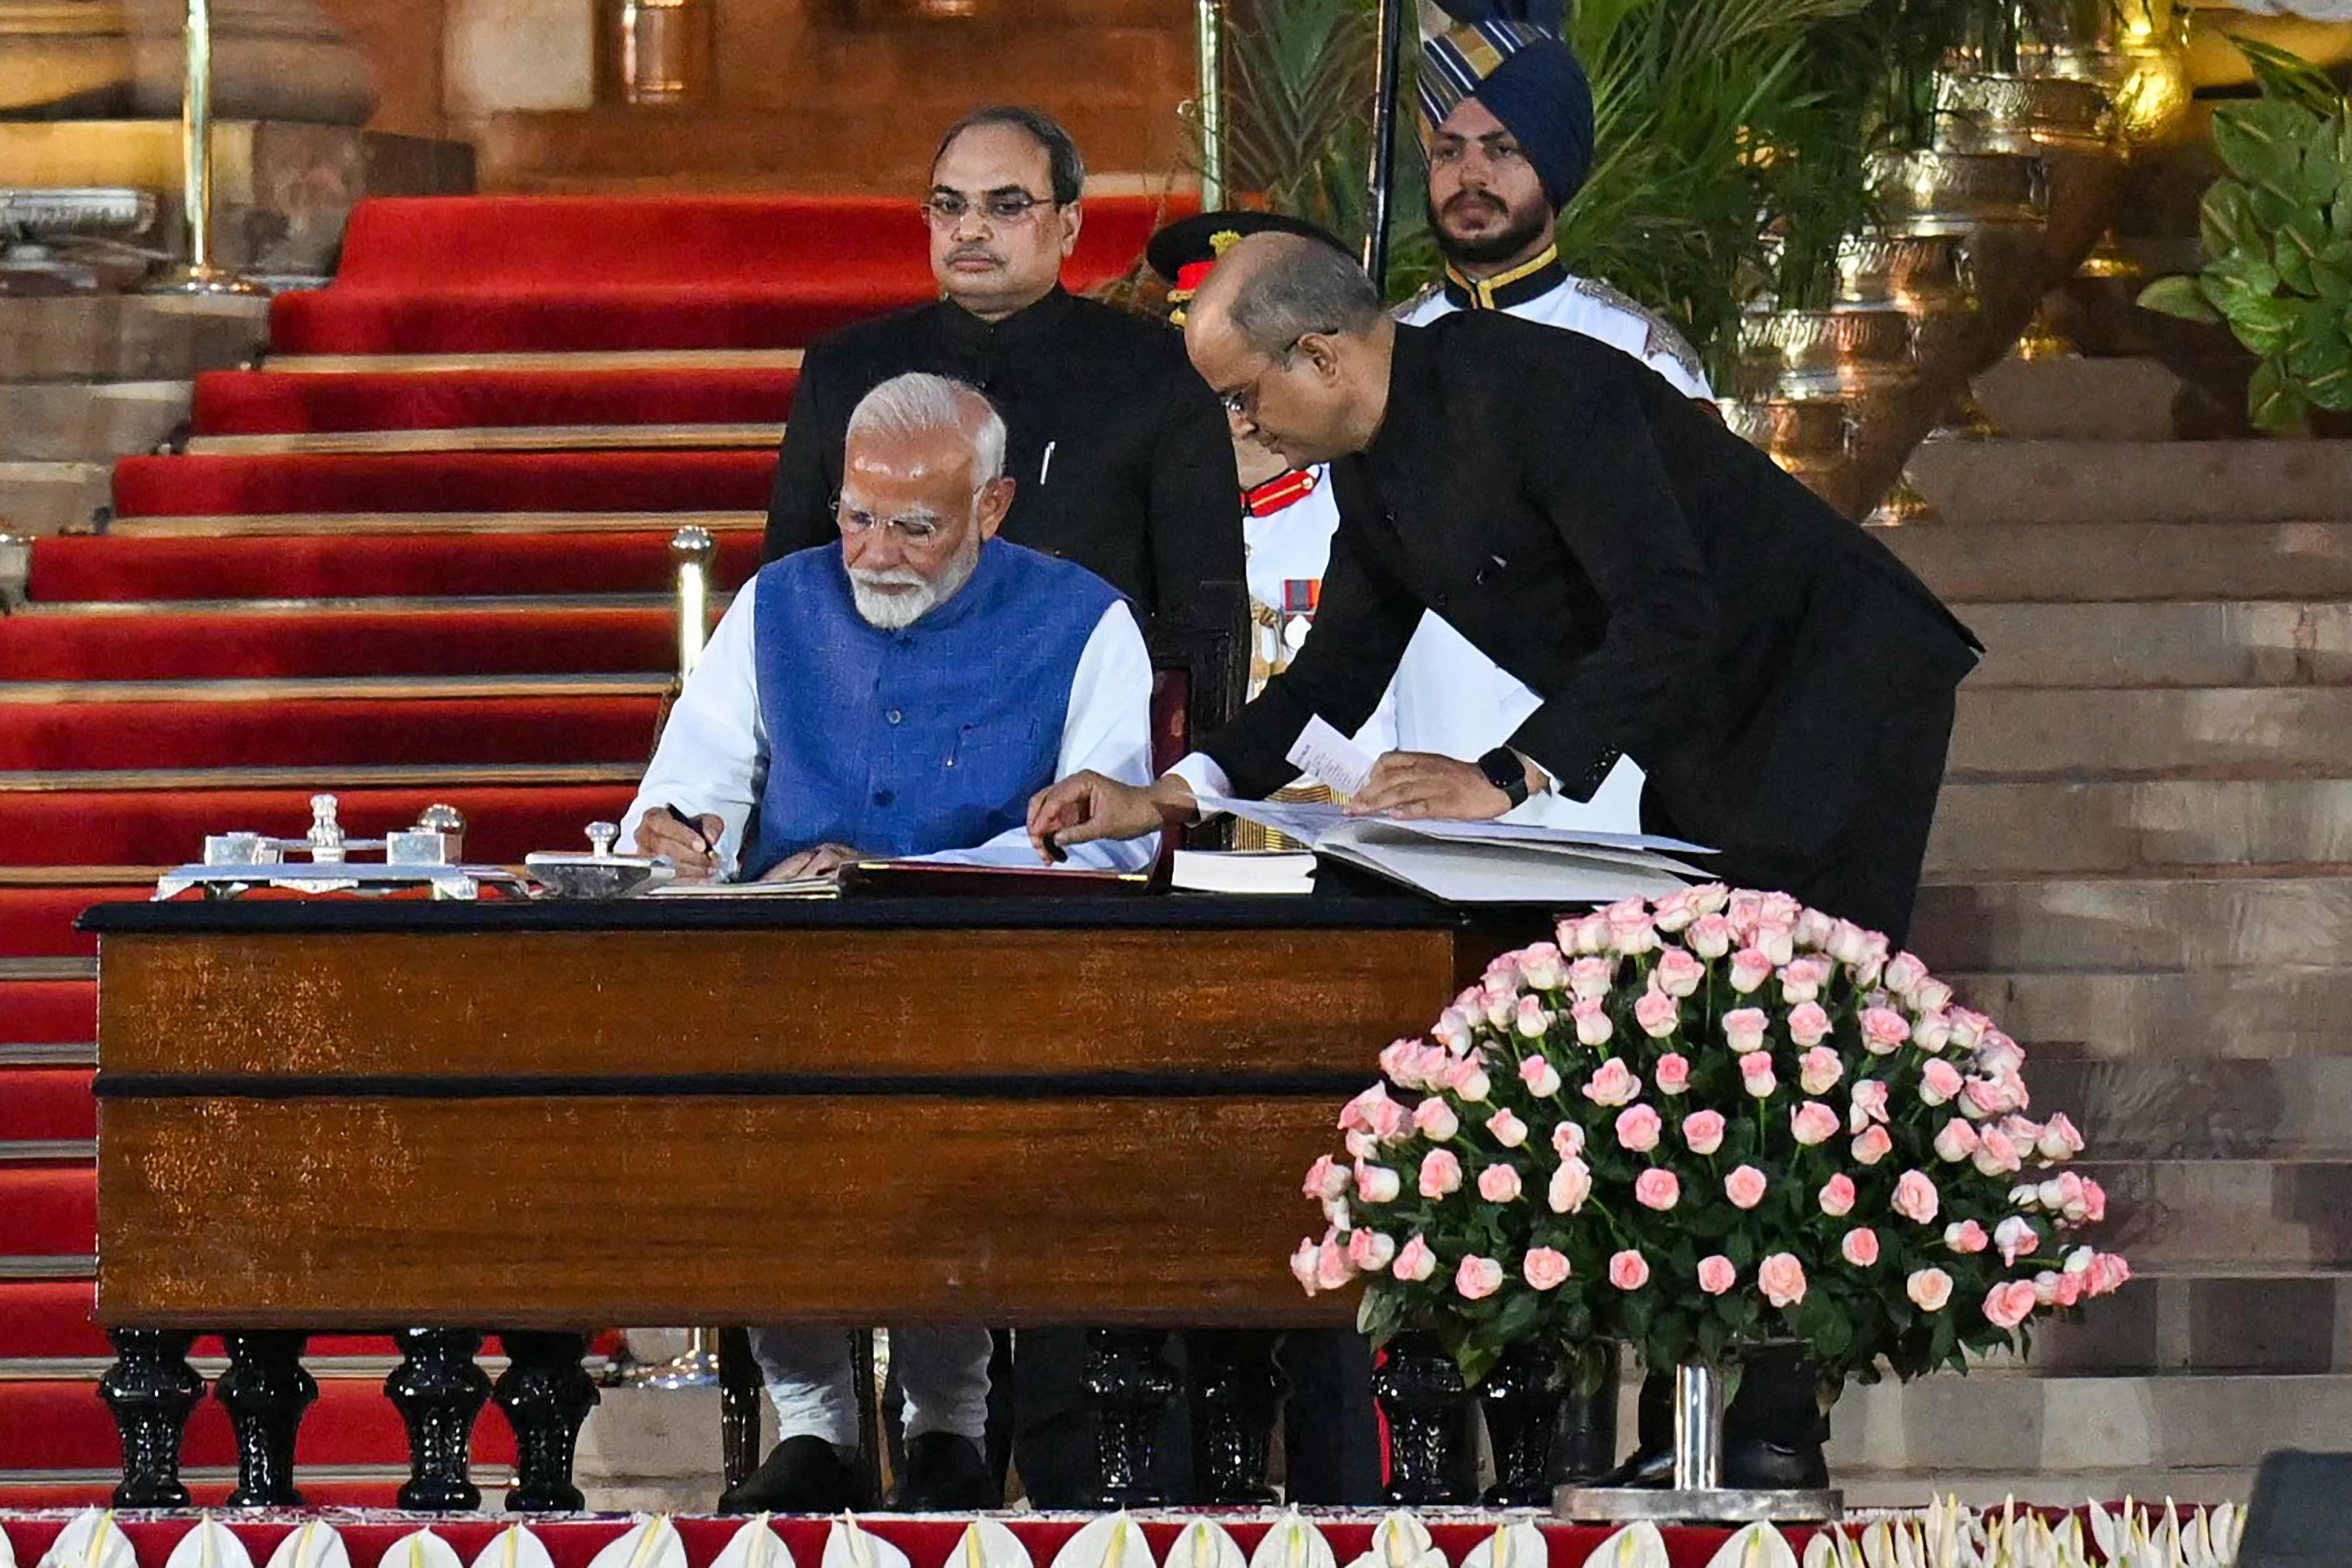 India’s Bharatiya Janata Party leader Narendra Modi signs after taking the oath of office for a third term as the country’s prime minister during the oath-taking ceremony in New Delhi. Photo: AFP